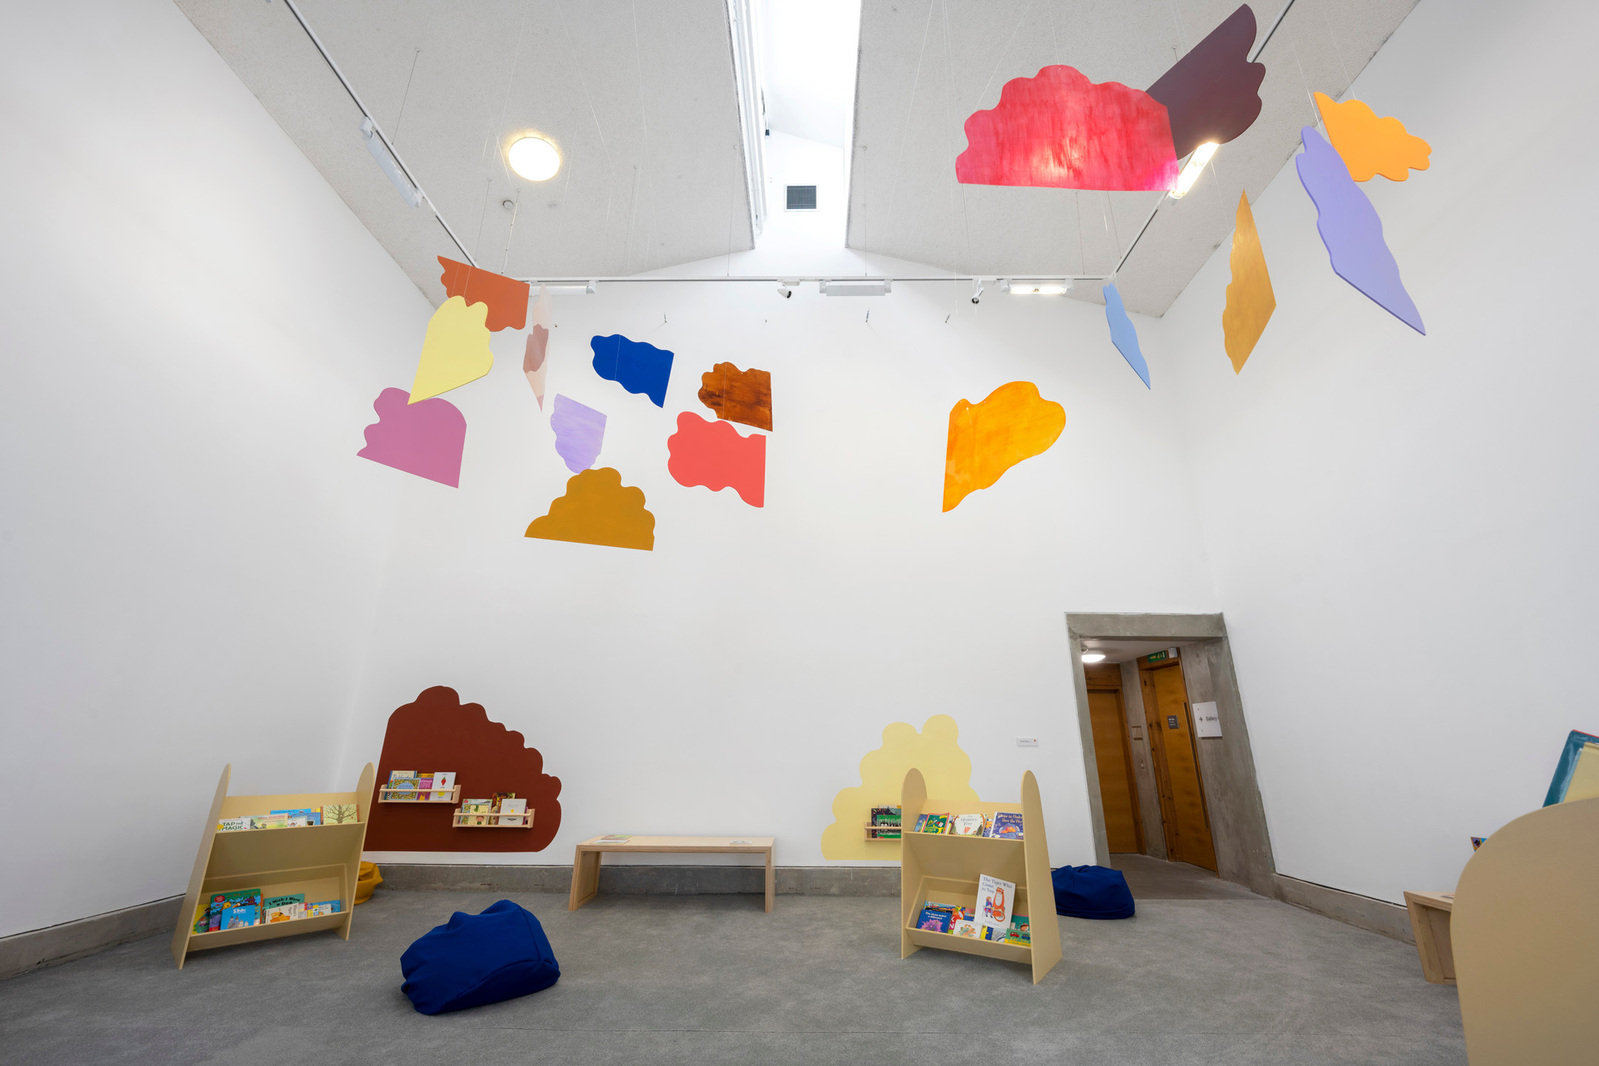 Colourful hanging mobile installation at Bluecoat Gallery by Millie Toyin Olateju 